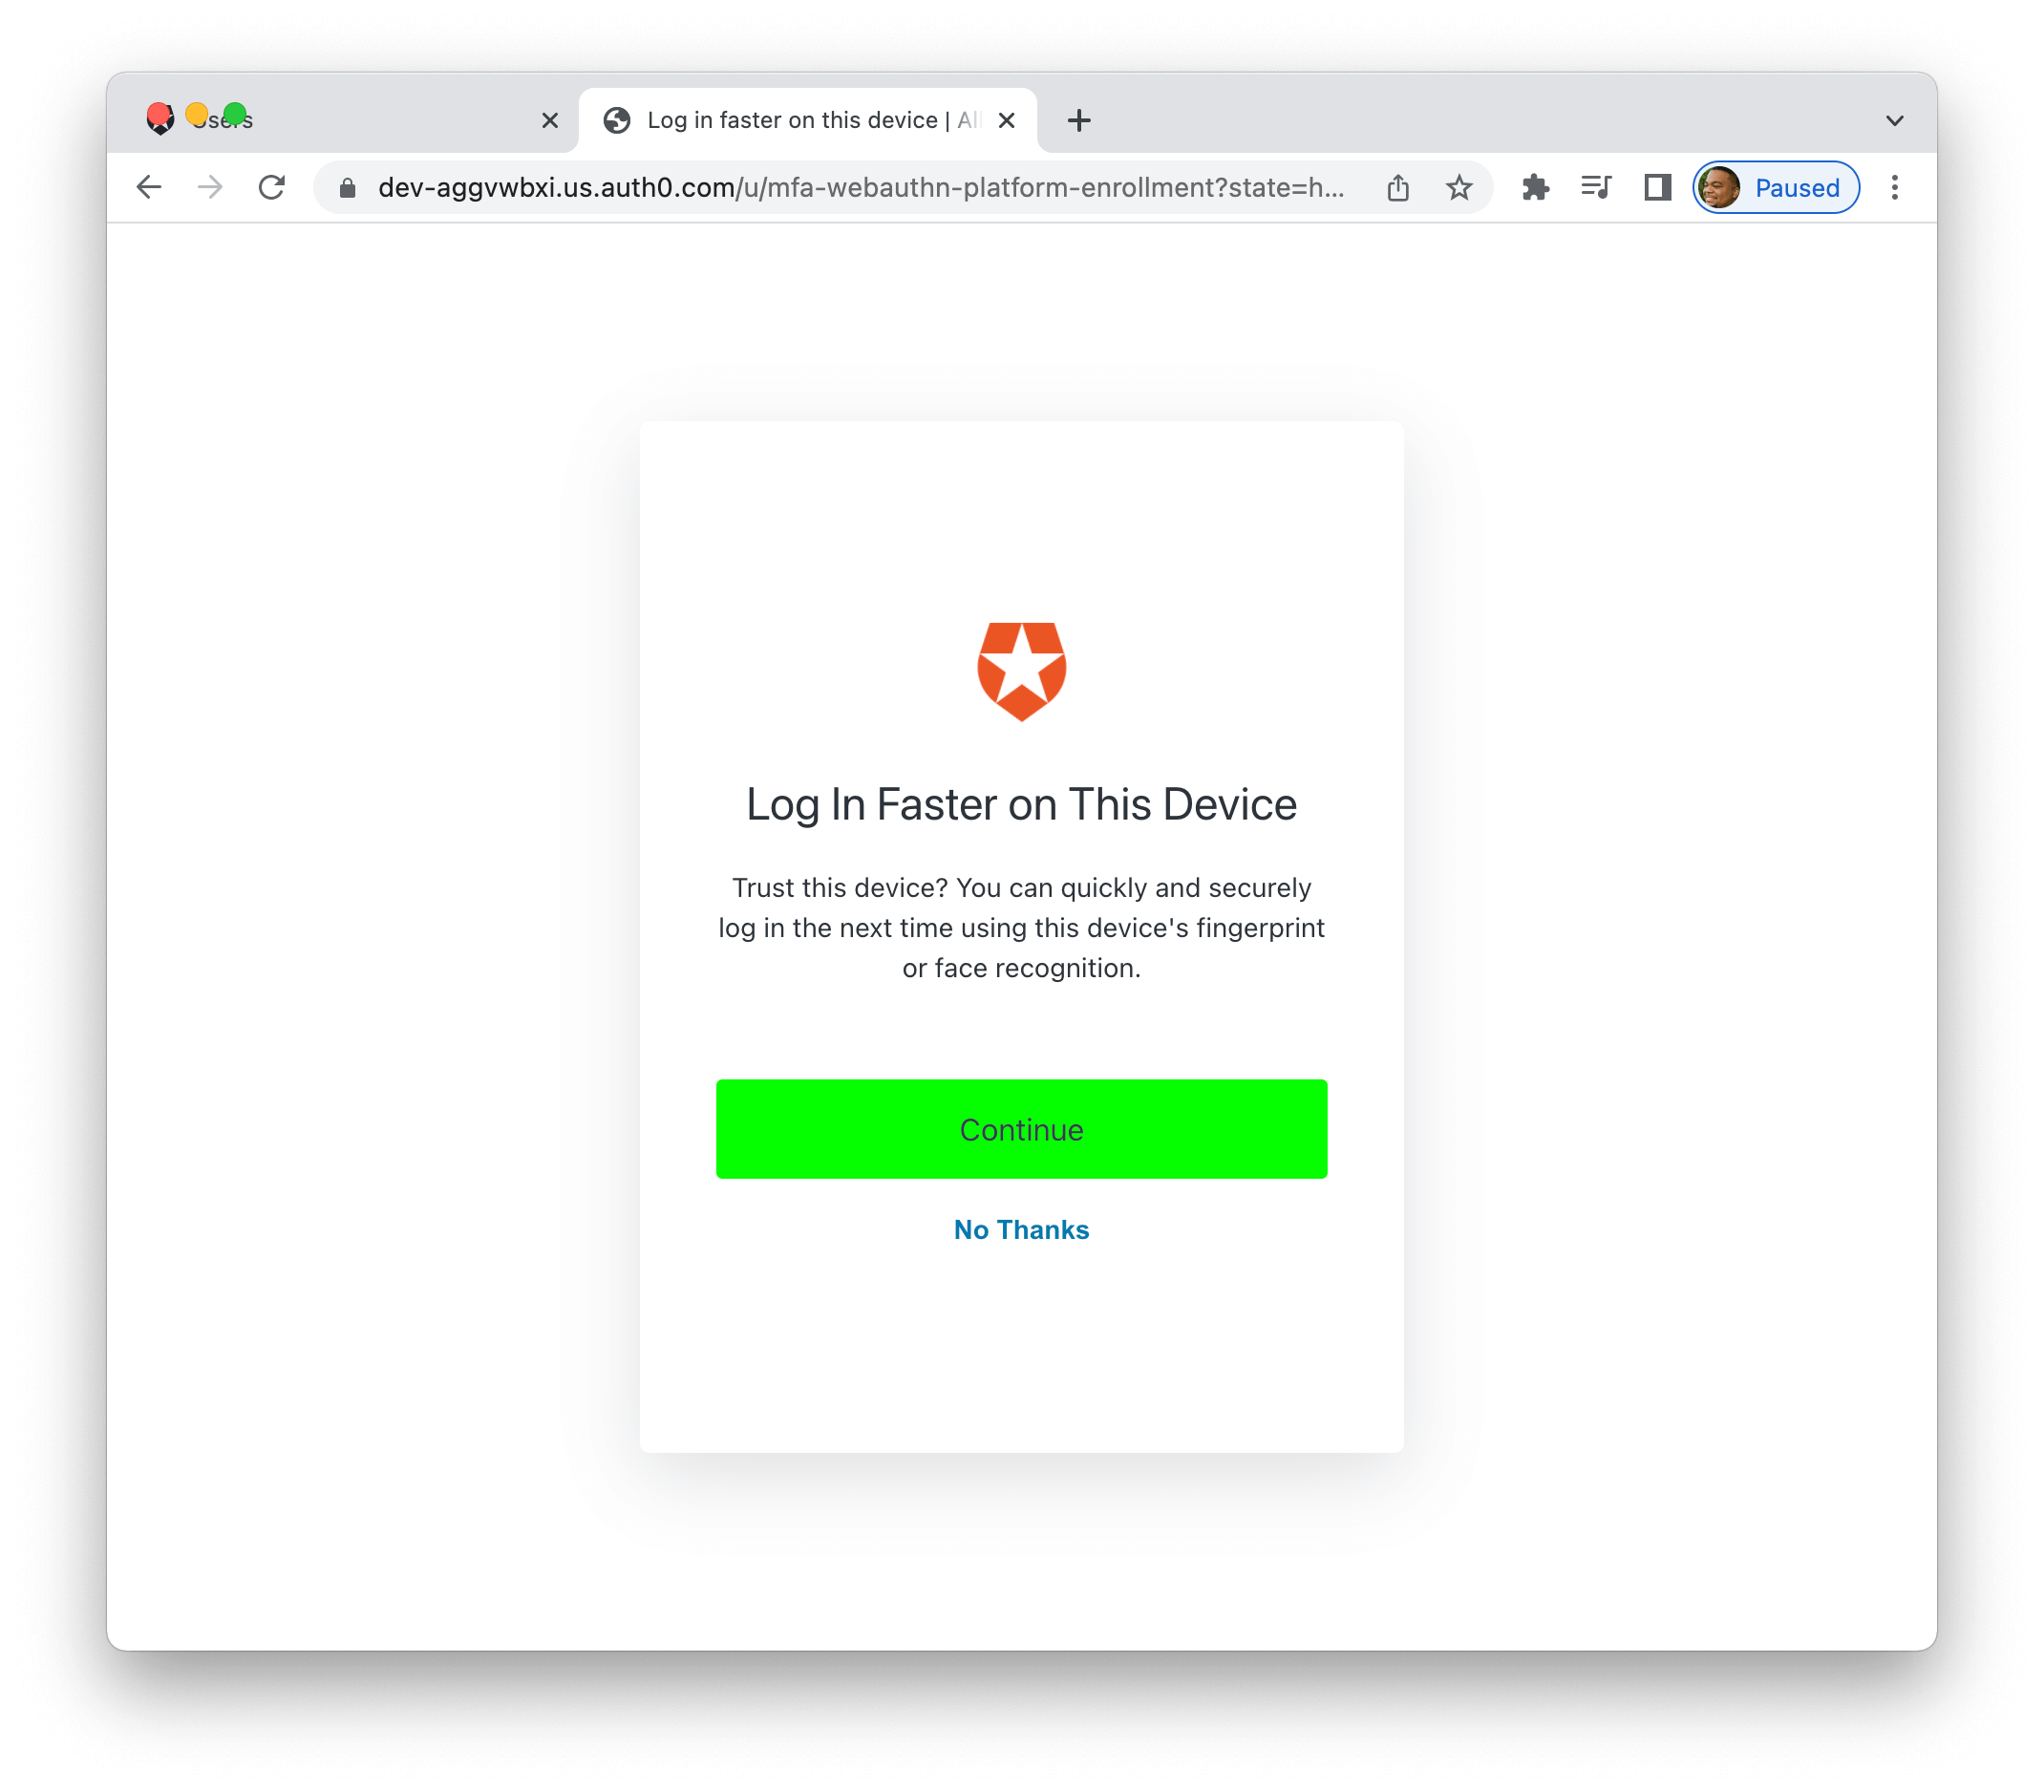 Auth0 Long In Faster Screen